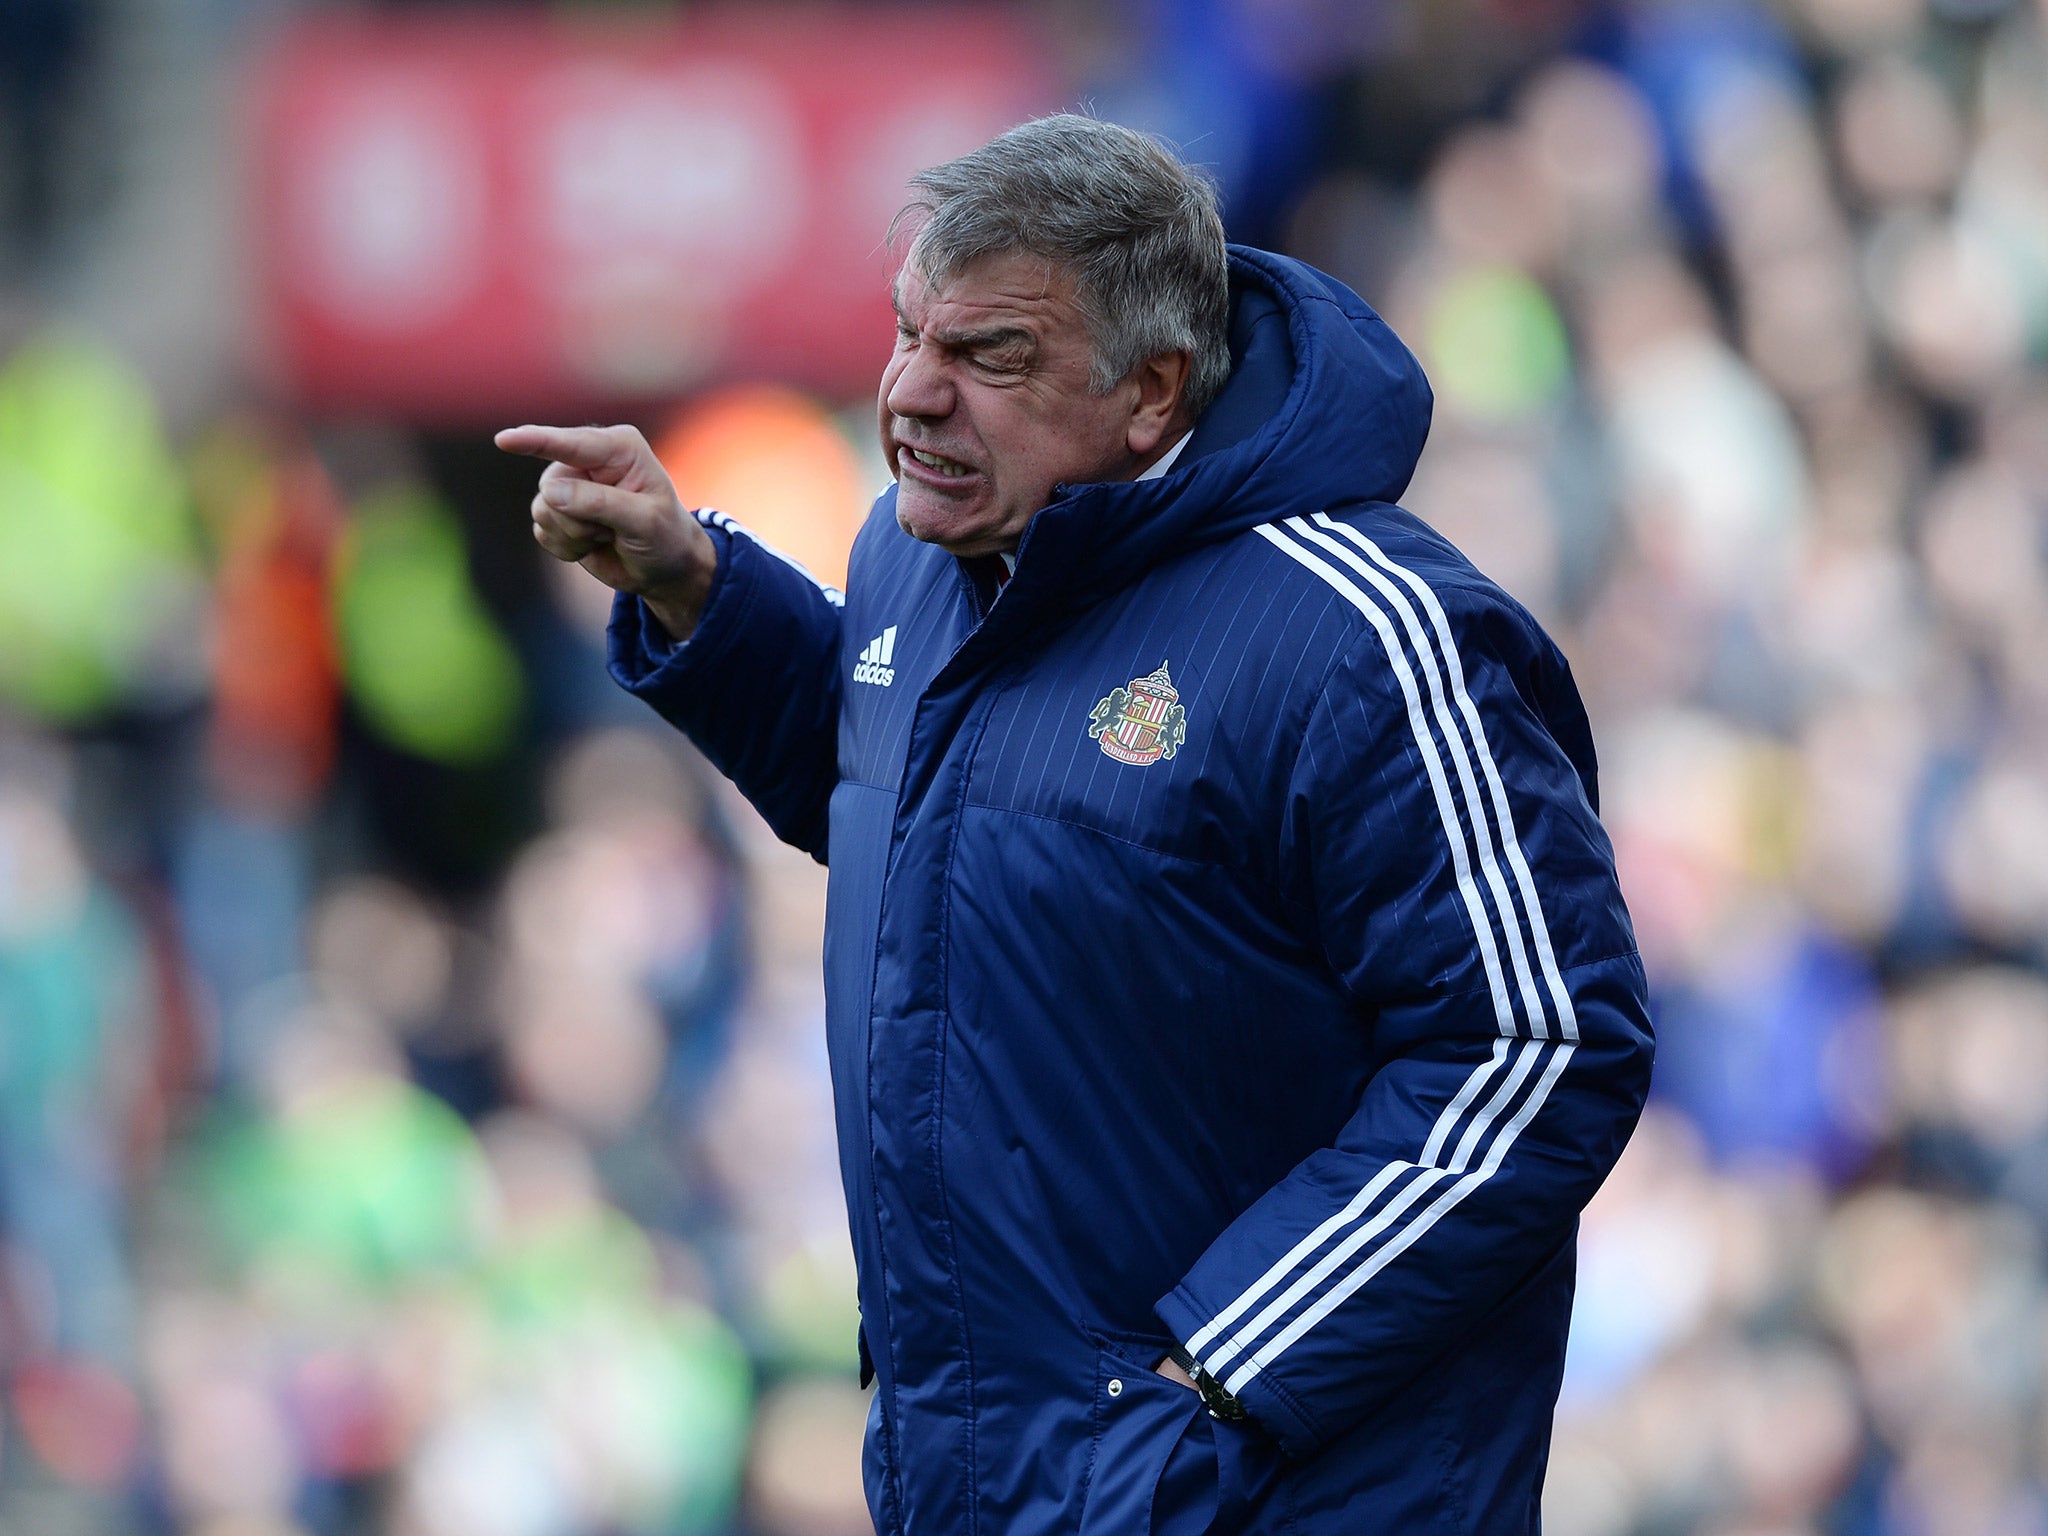 Sunderland and Sam Allardyce failed to thank each other in their respective statements